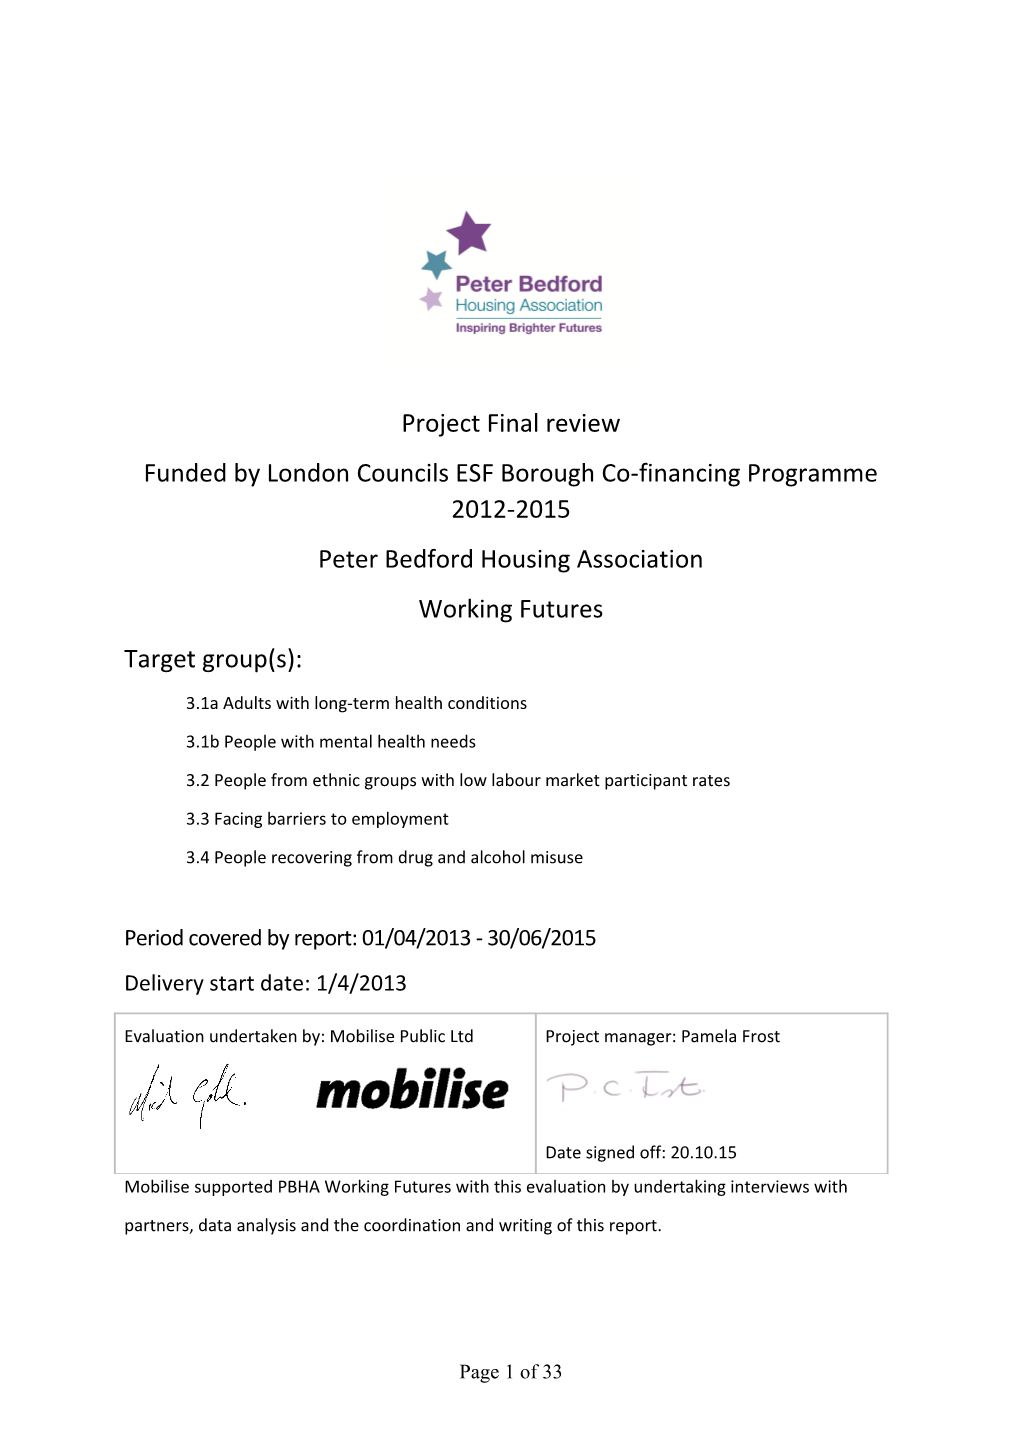 Funded by London Councils ESF Borough Co-Financing Programme 2012-2015